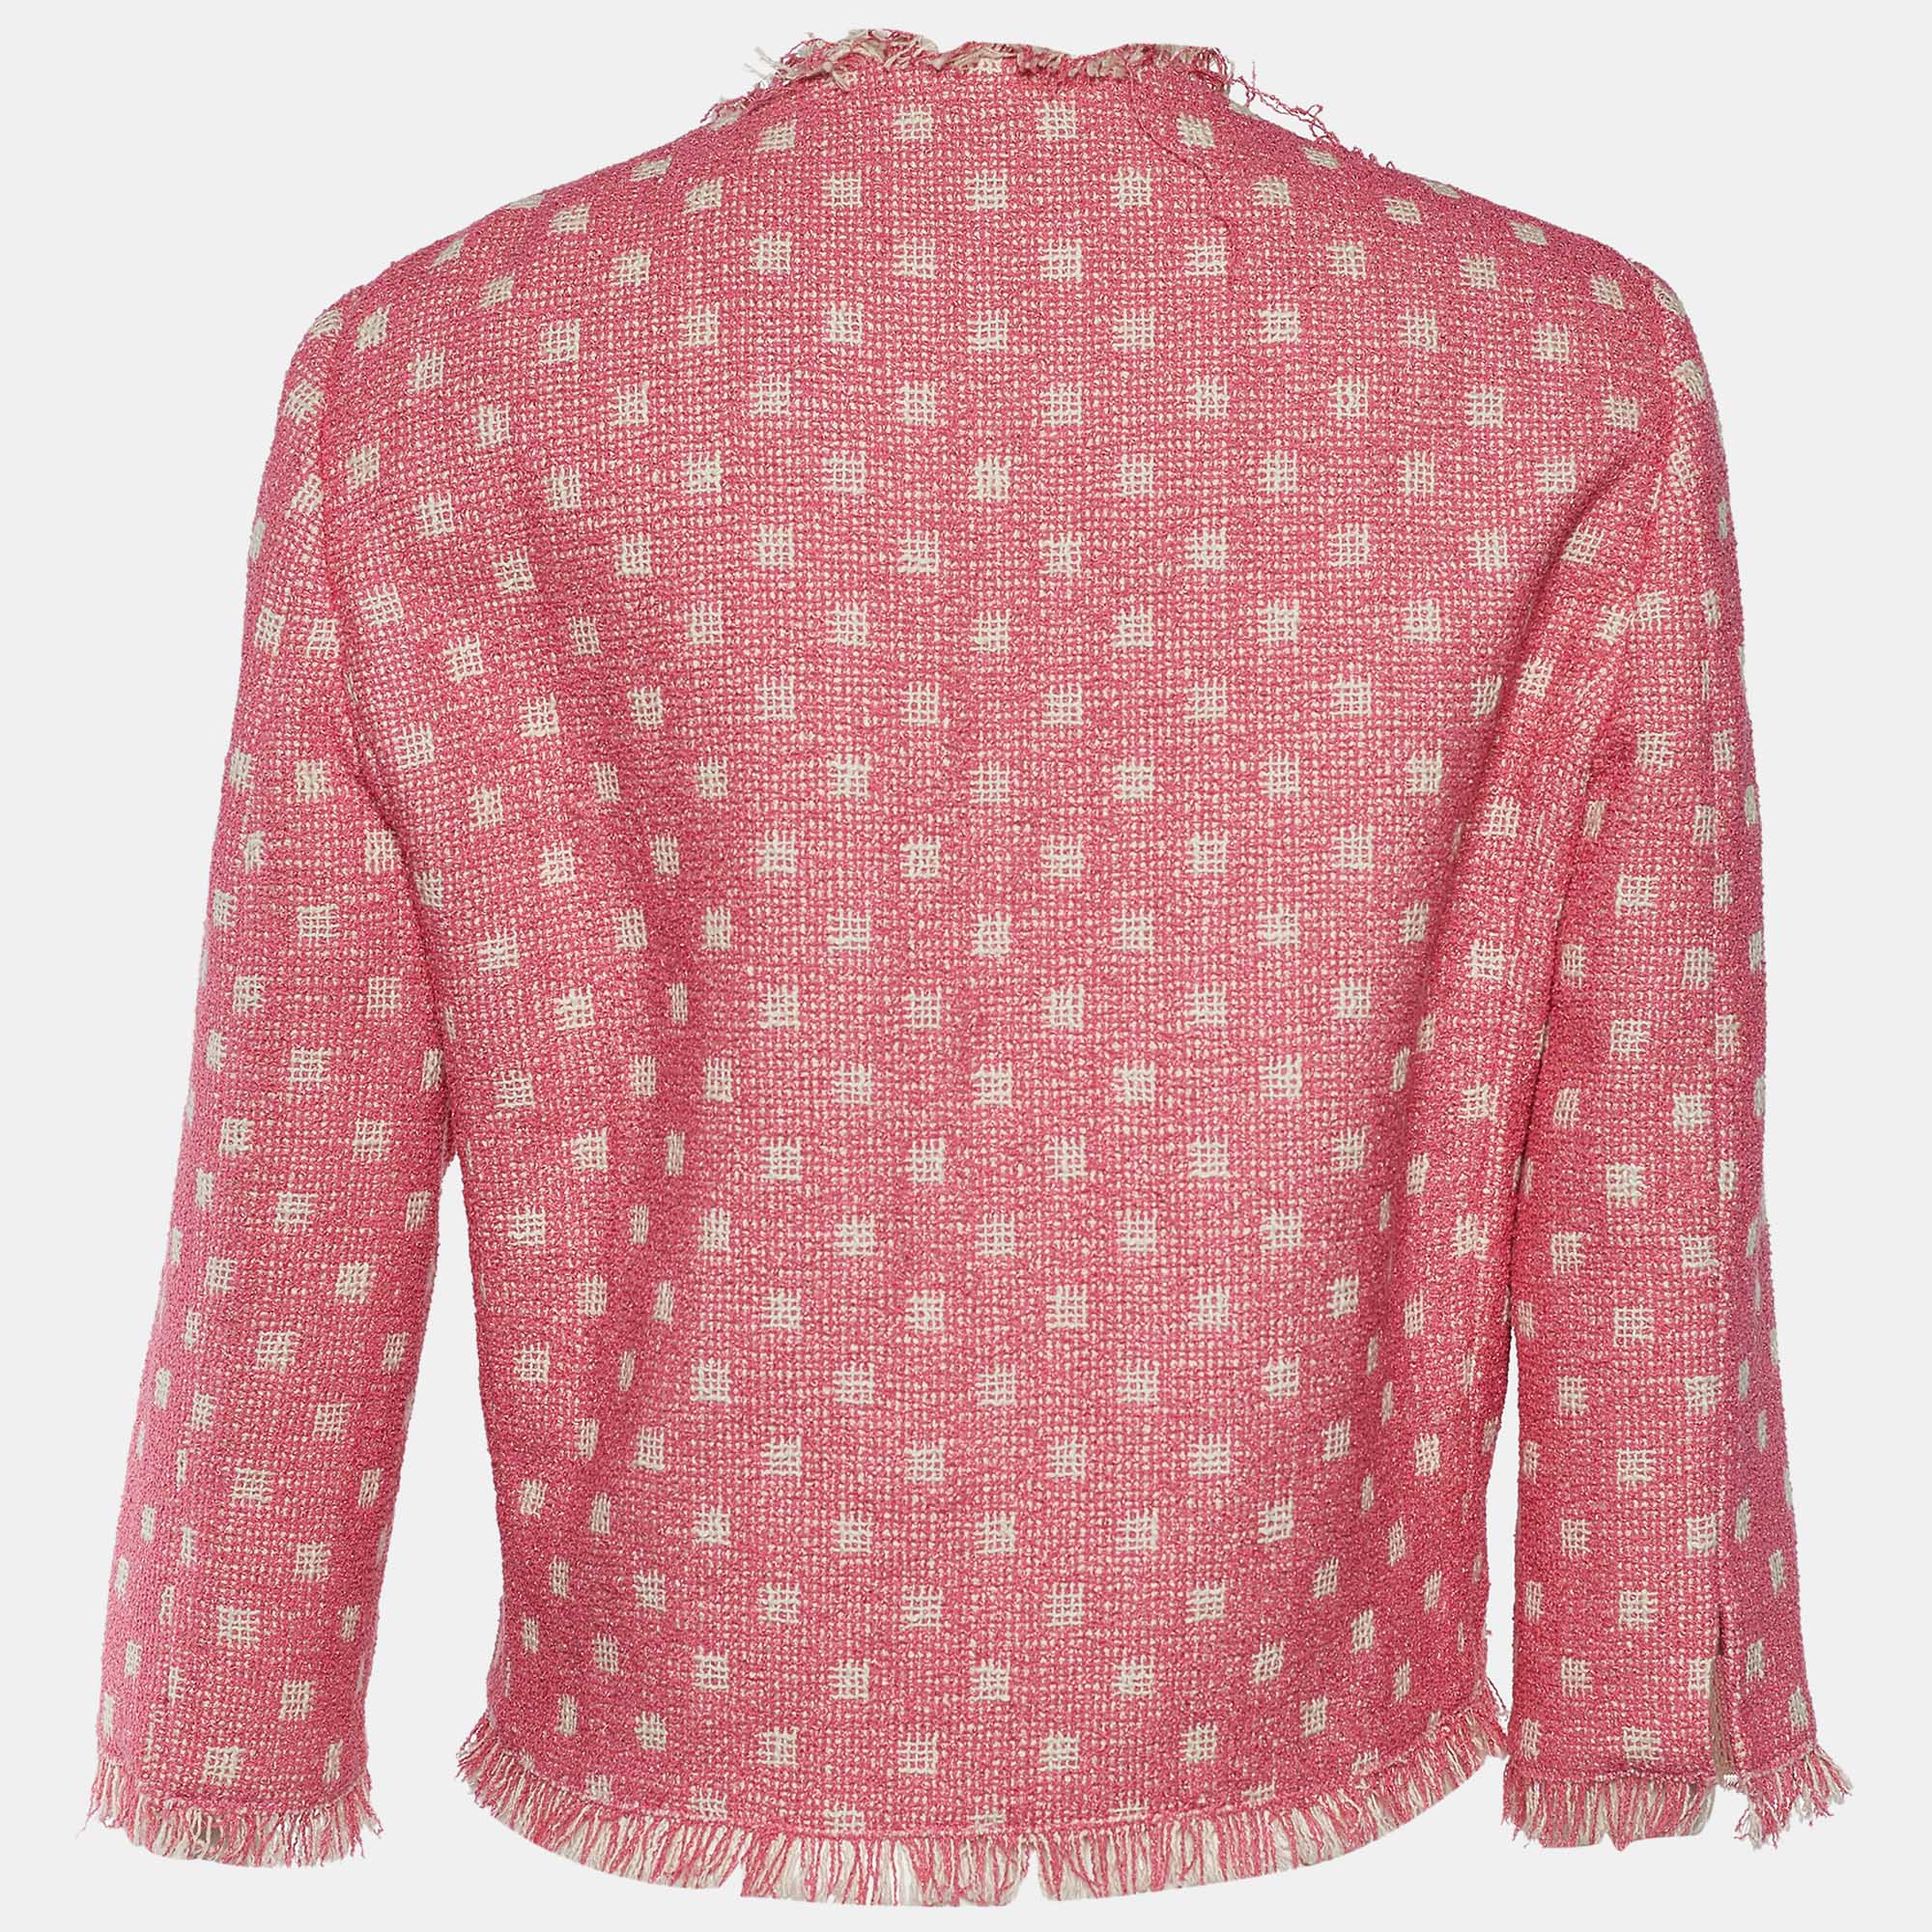 

Moschino Cheap and Chic Pink Tweed Jacket